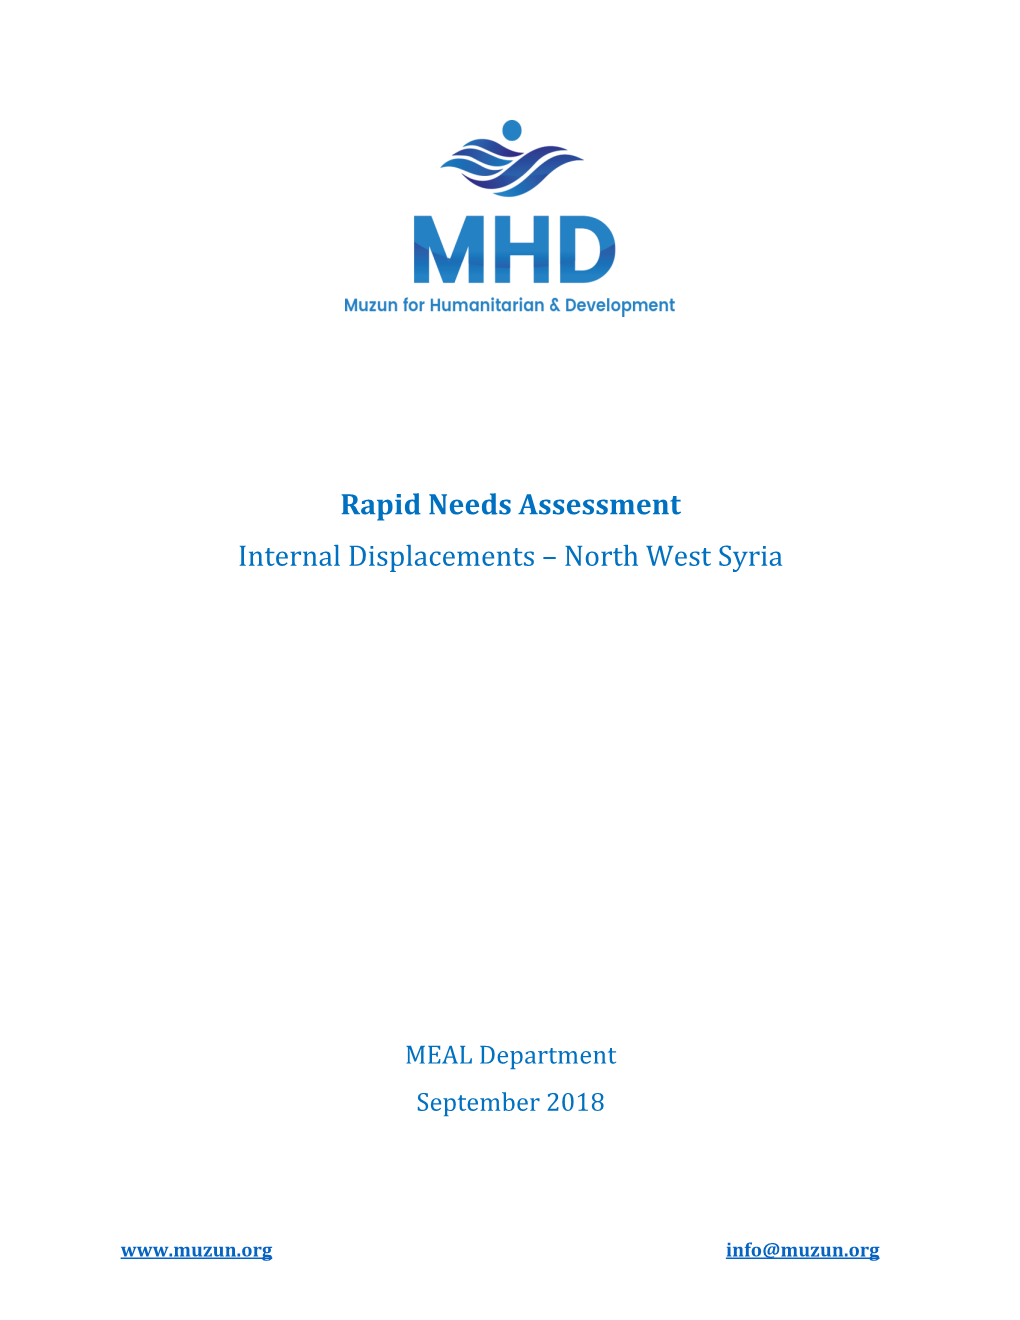 Rapid Needs Assessment Internal Displacements – North West Syria